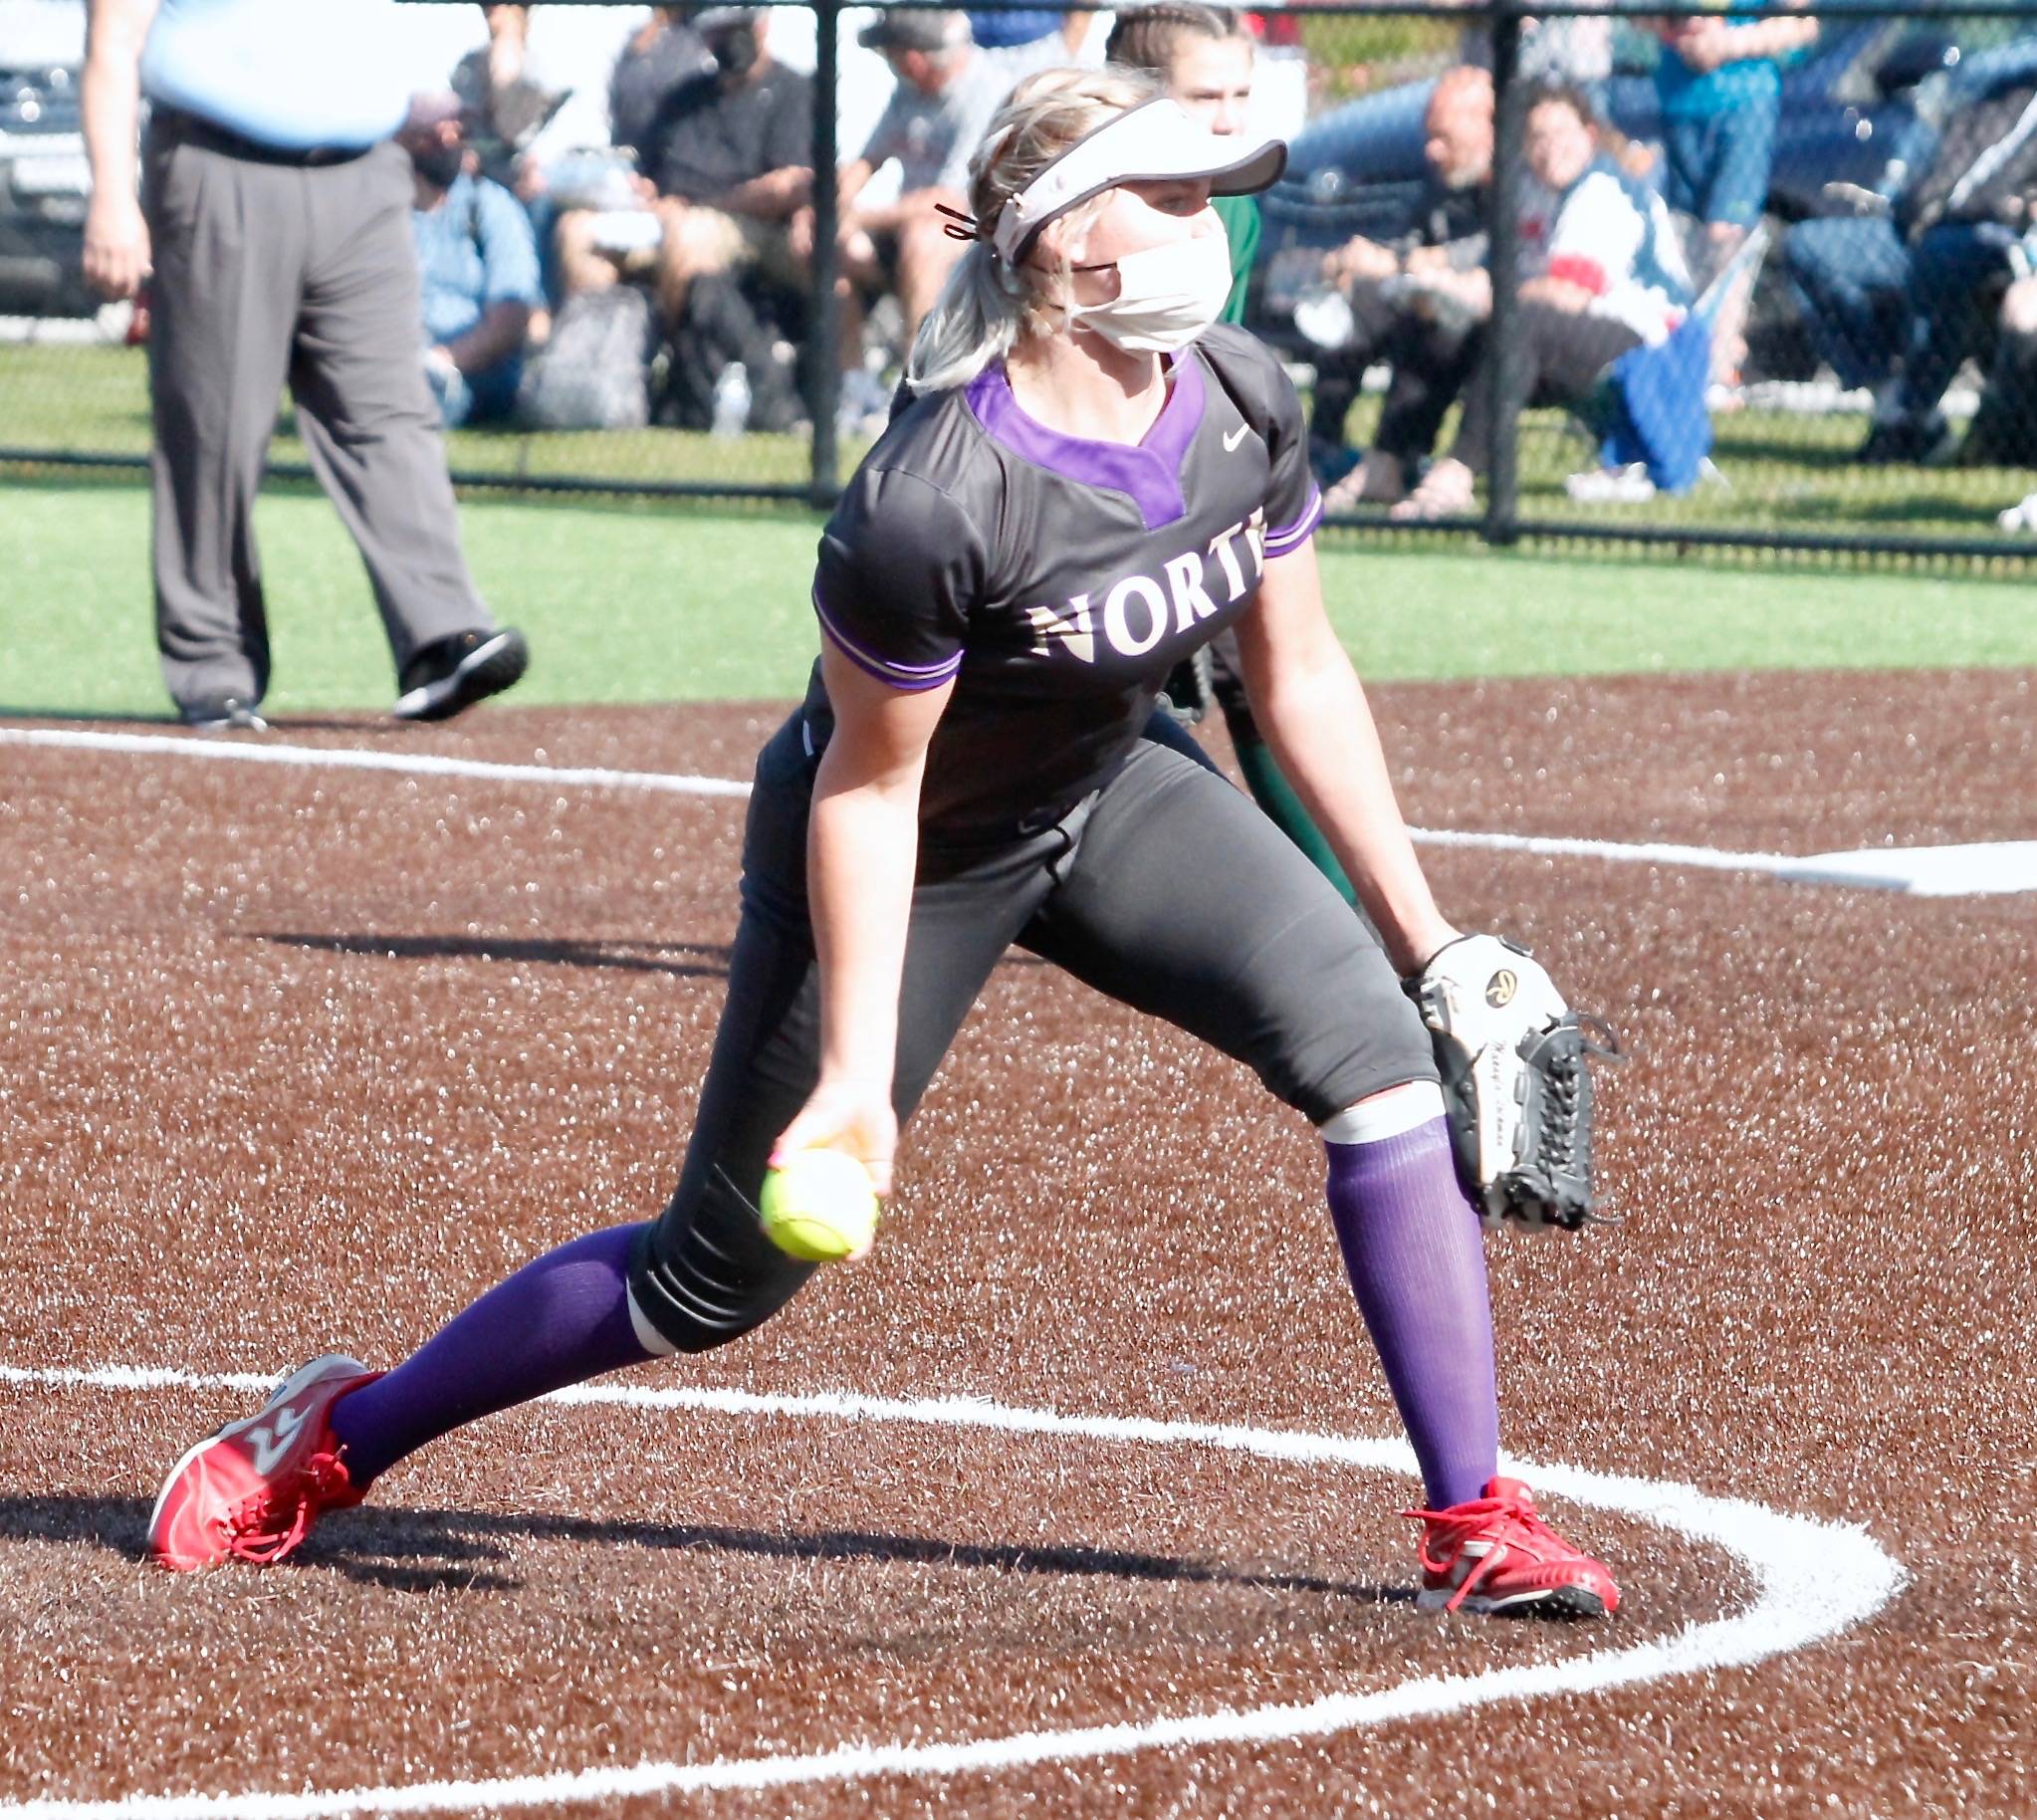 North Kitsap junior Makalya Stockman was named one of the game’s MVPs. Stockman picked up a hit and struck out four batters in two innings. (Mark Krulish/Kitsap News Group)